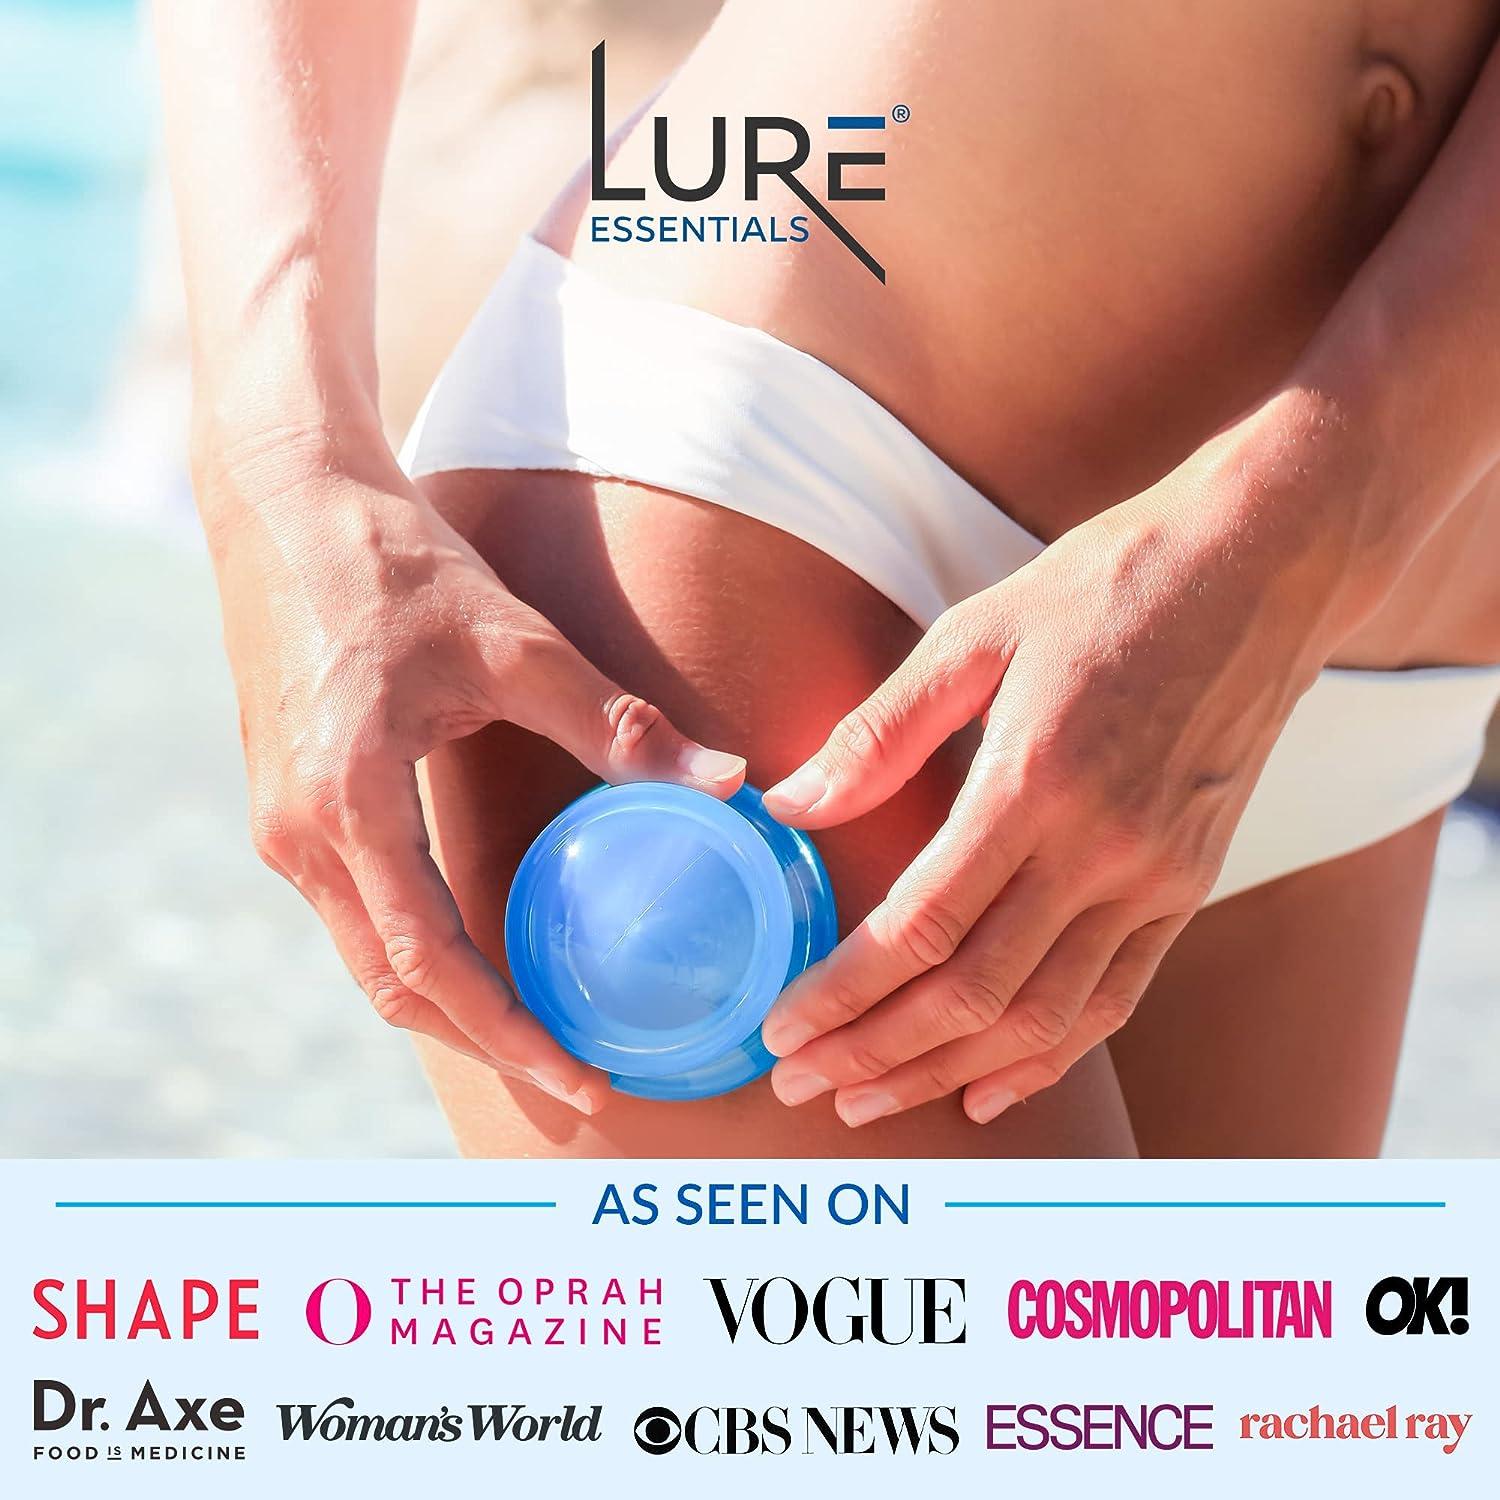 LURE Essentials Zen Cupping Therapy Set Cupping Kit for Massage Therapy -  Silicone Cups - Massage Cups Cupping for Cellulite – Lymphatic Drainage